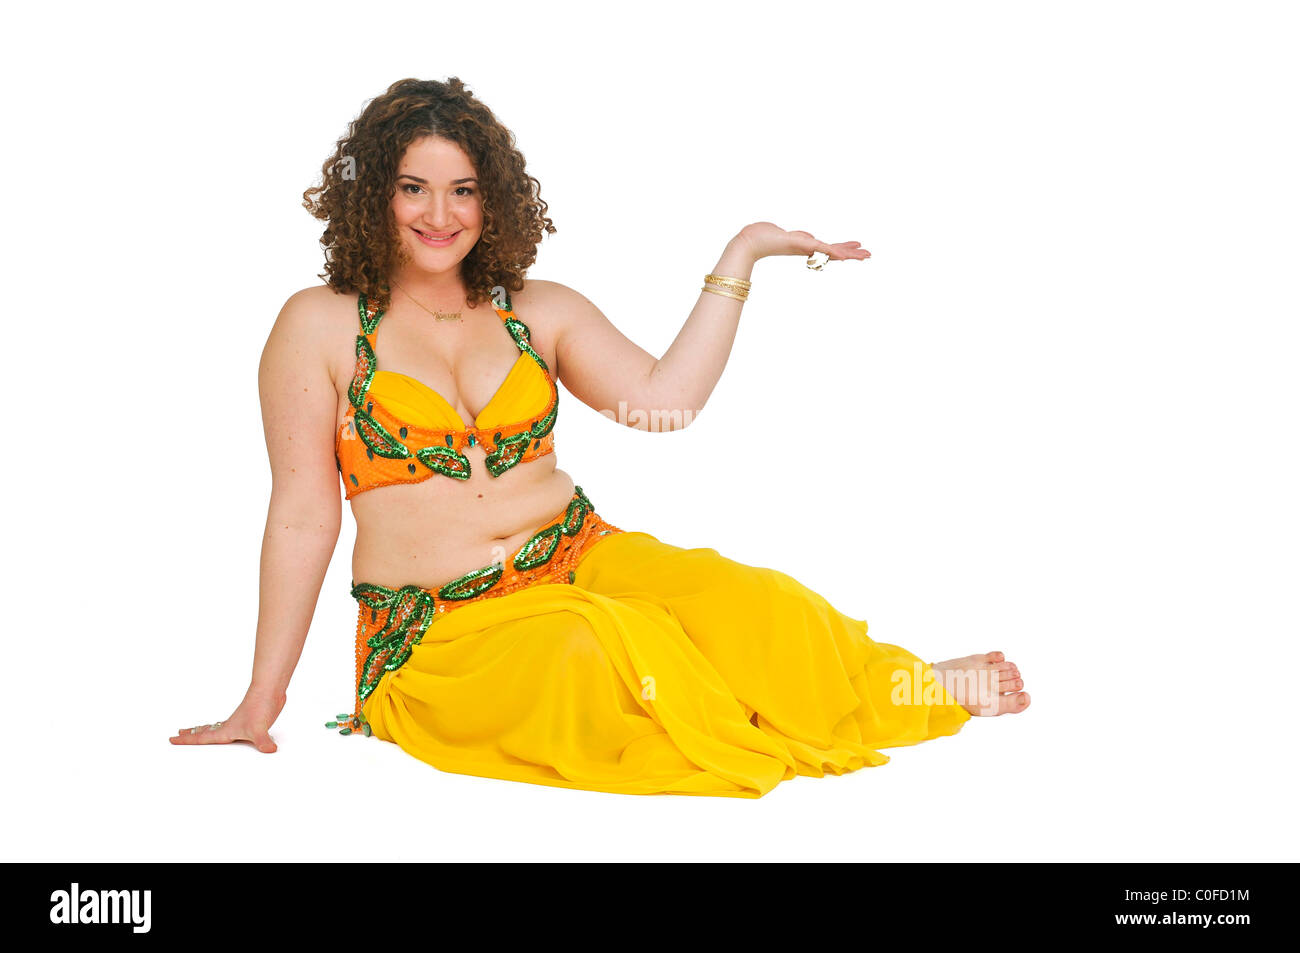 Belly dancer offers her hand On white Background Stock Photo